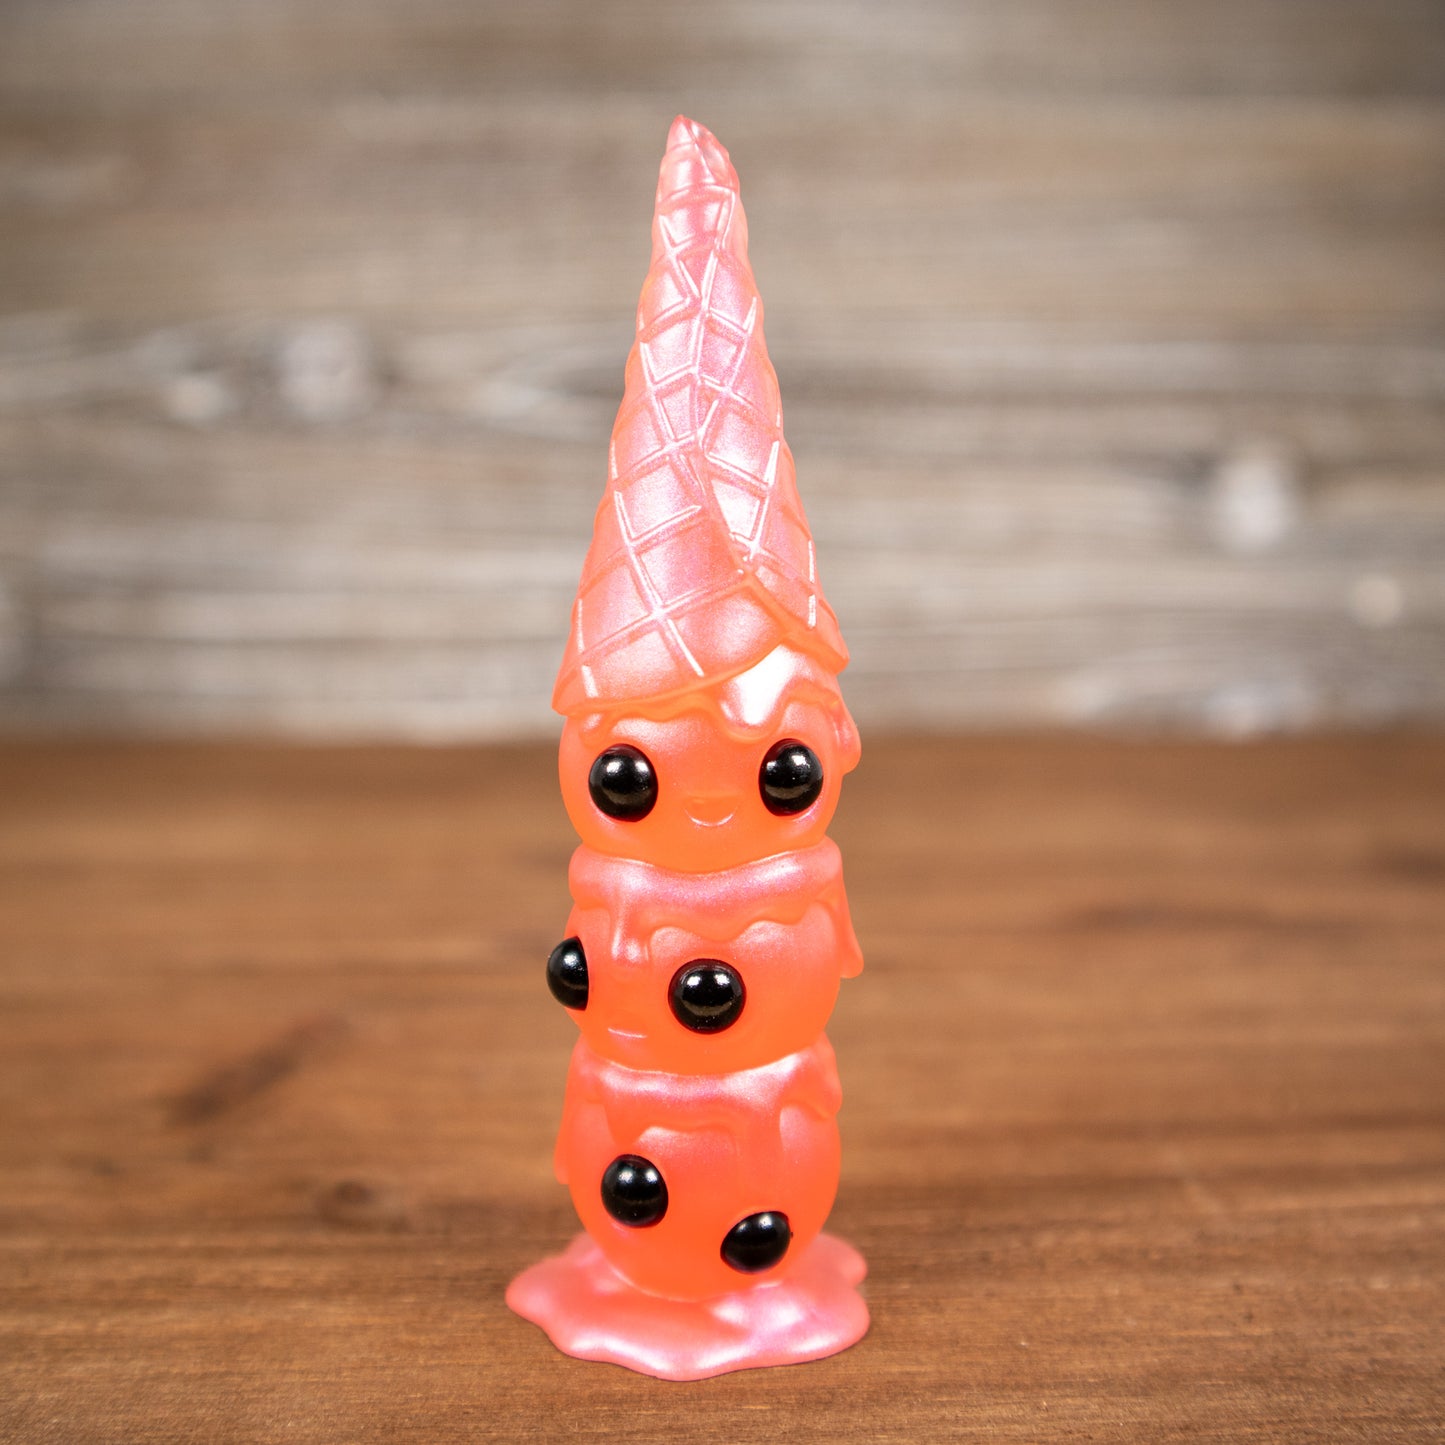 This is Wafull "Bubblegum" Limited Edition Resin Figure